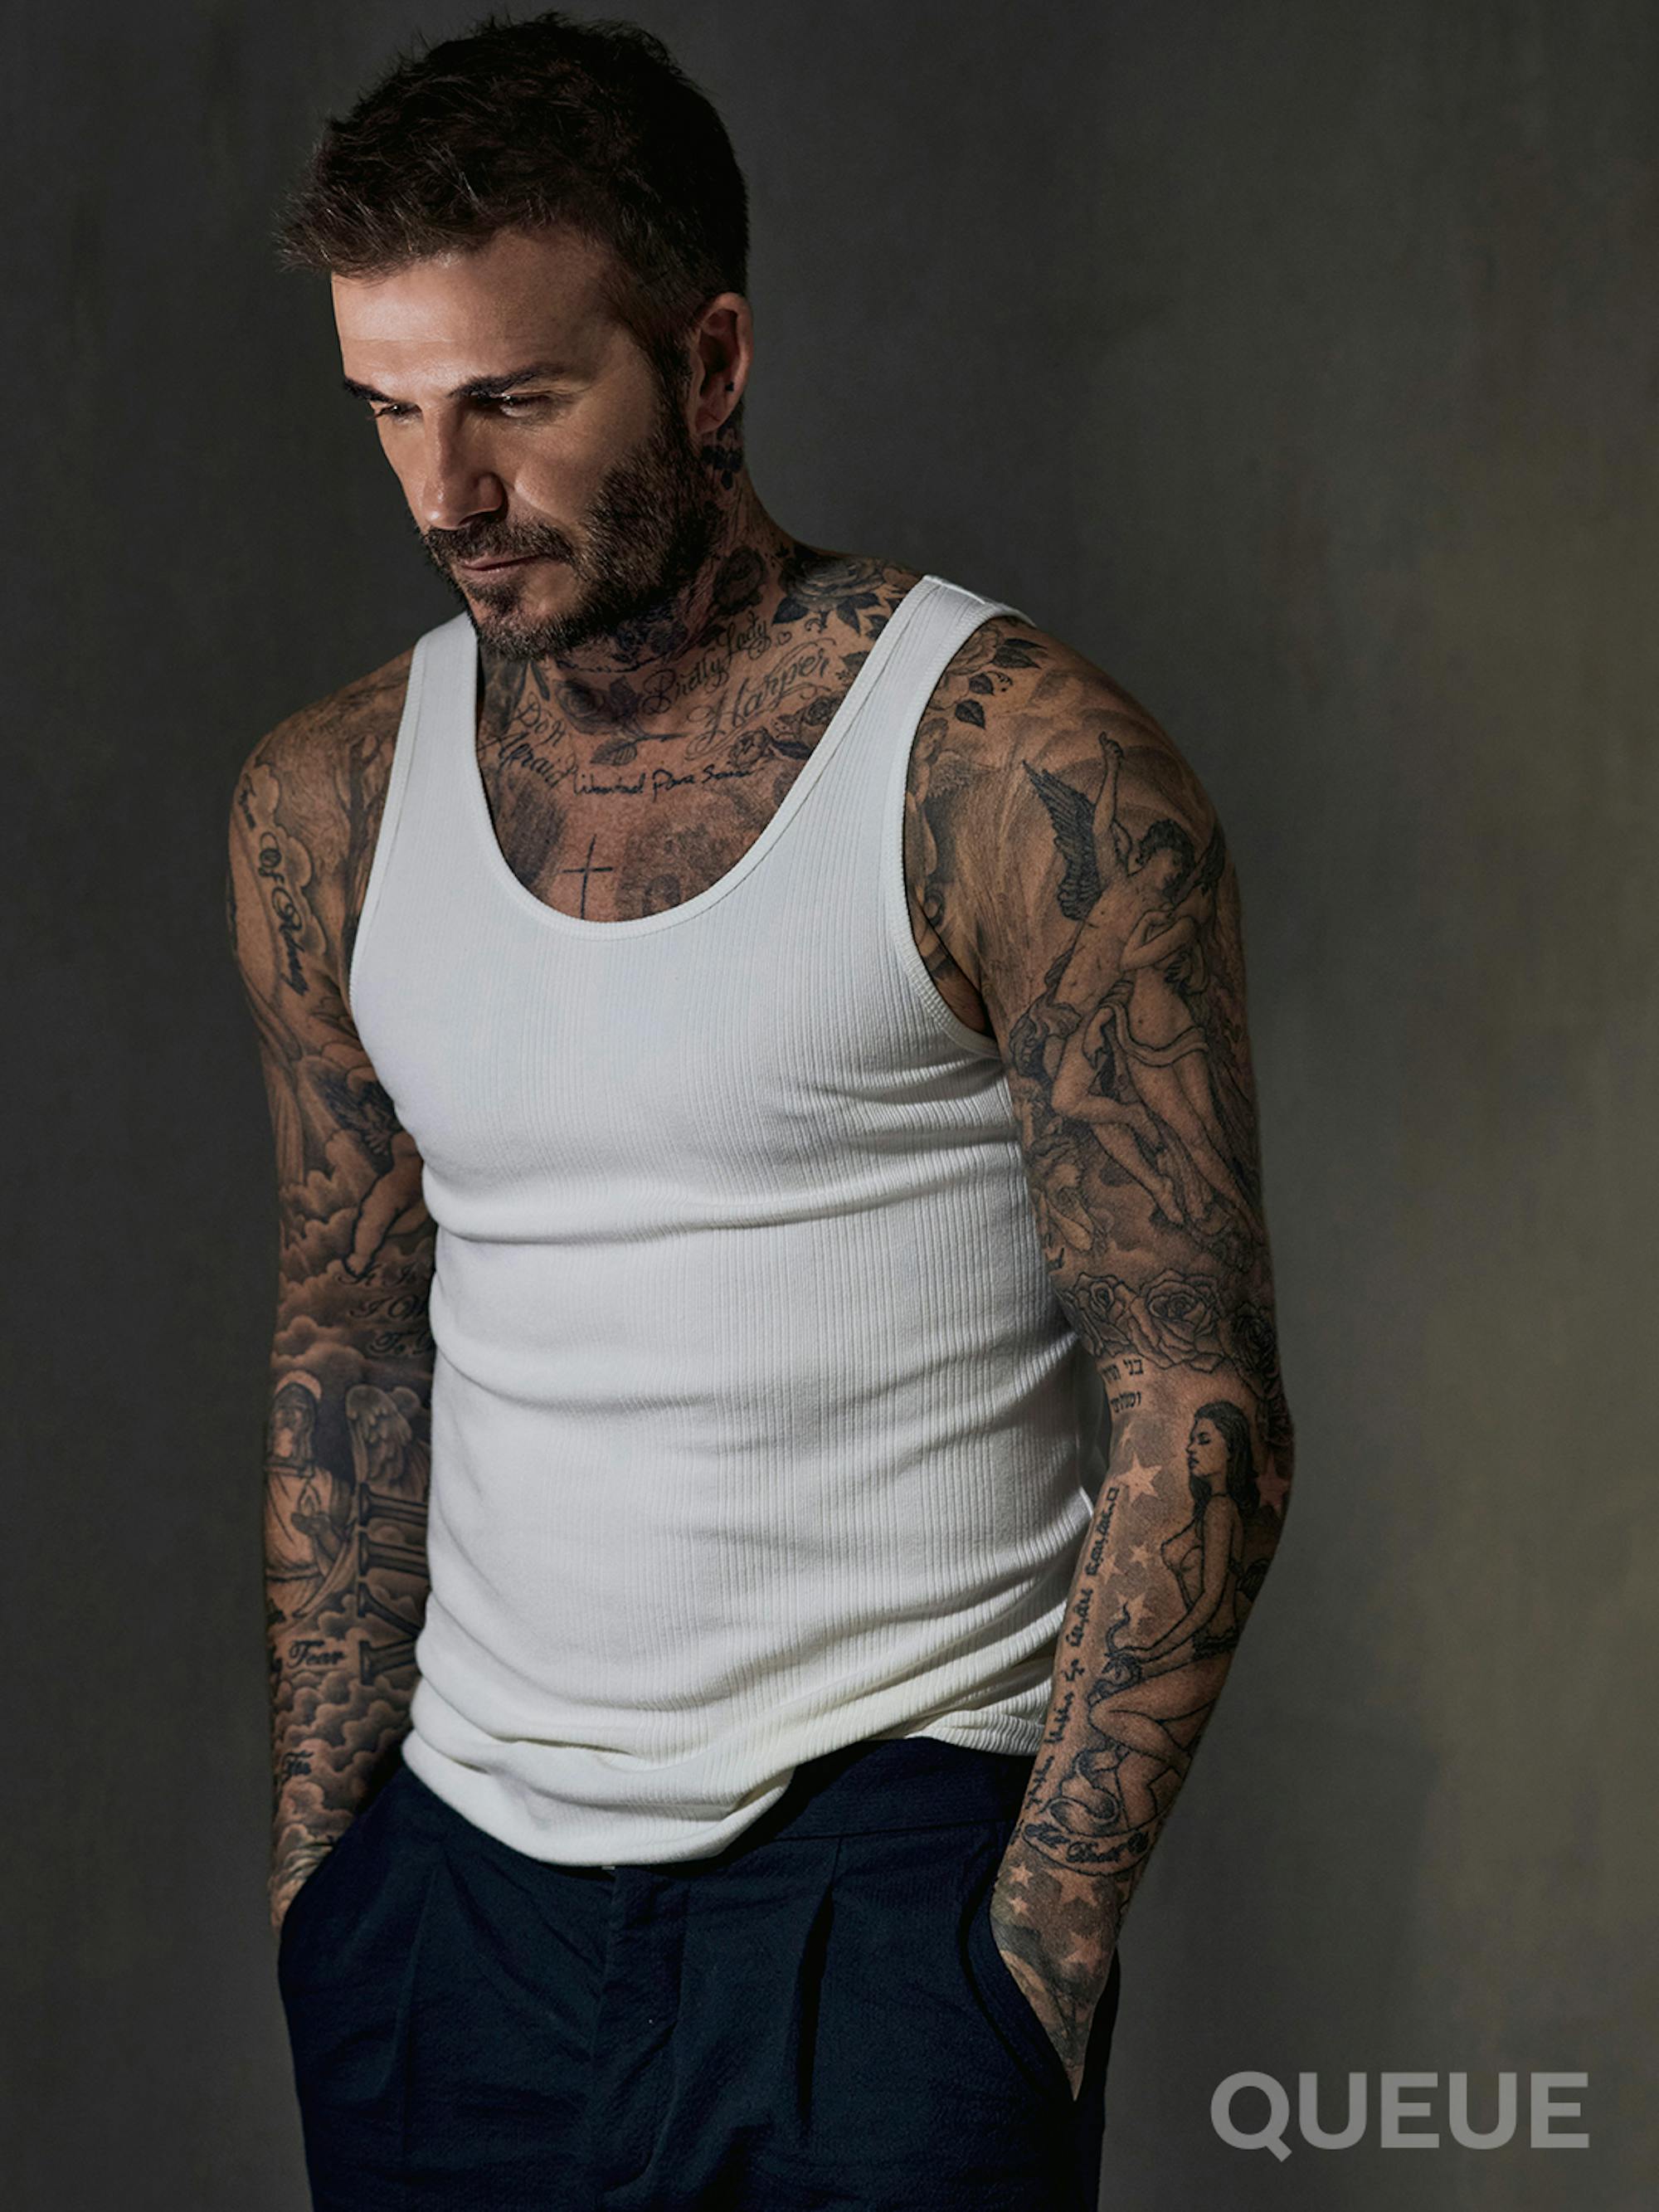 David Beckham wears black pants and a white shirt in a gray-walled room.